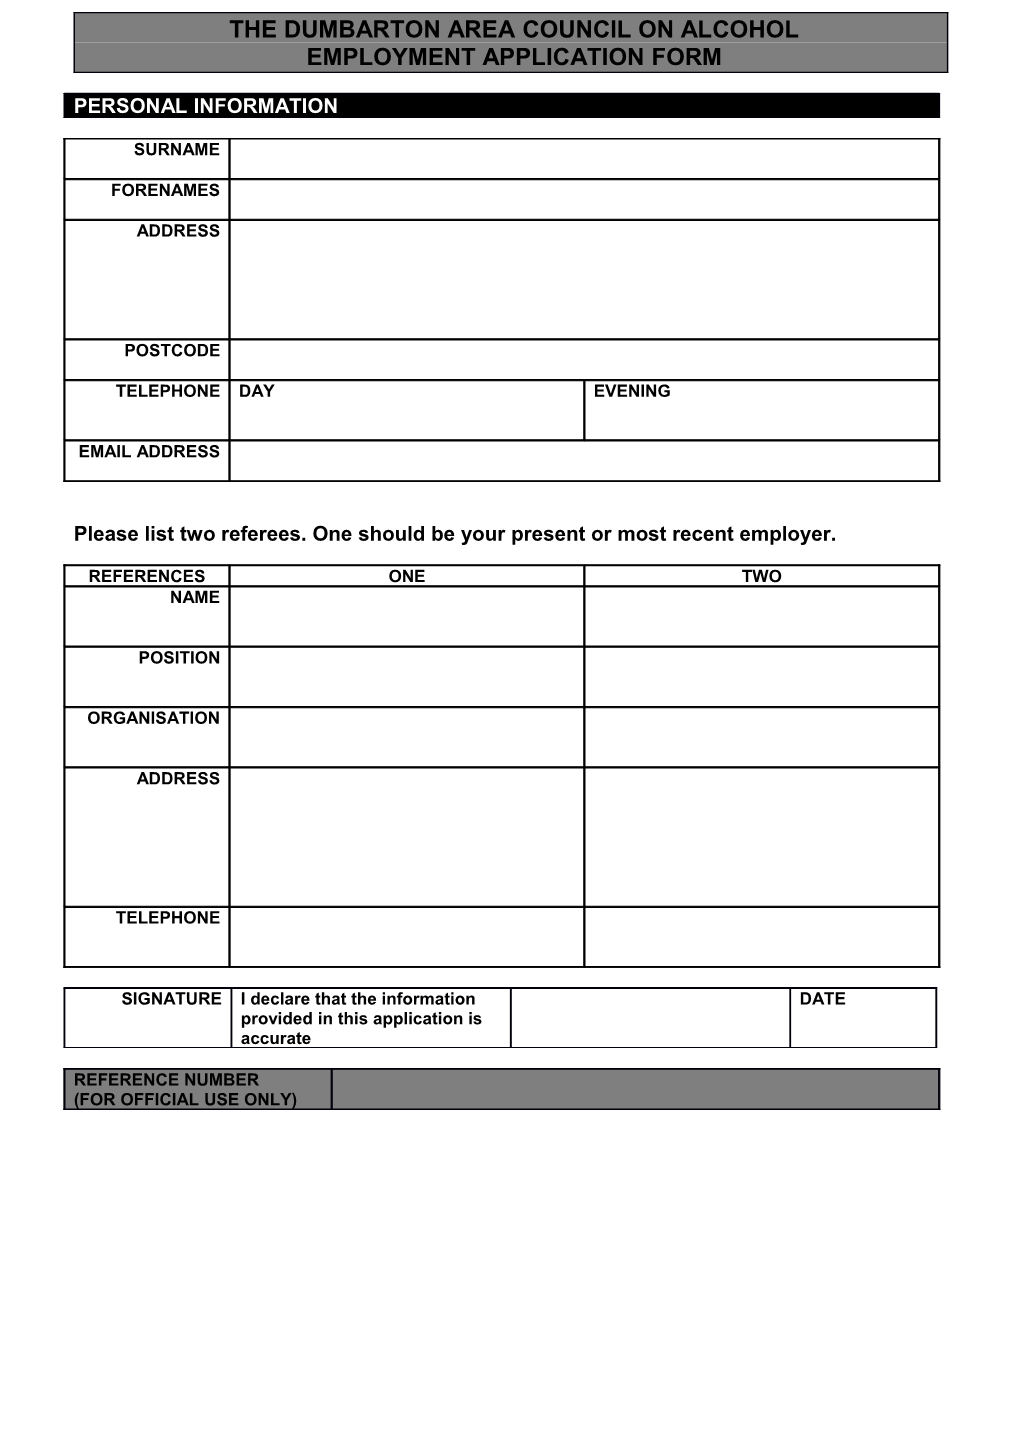 The Dumbarton Area Council on Alcohol - Employment Application Form